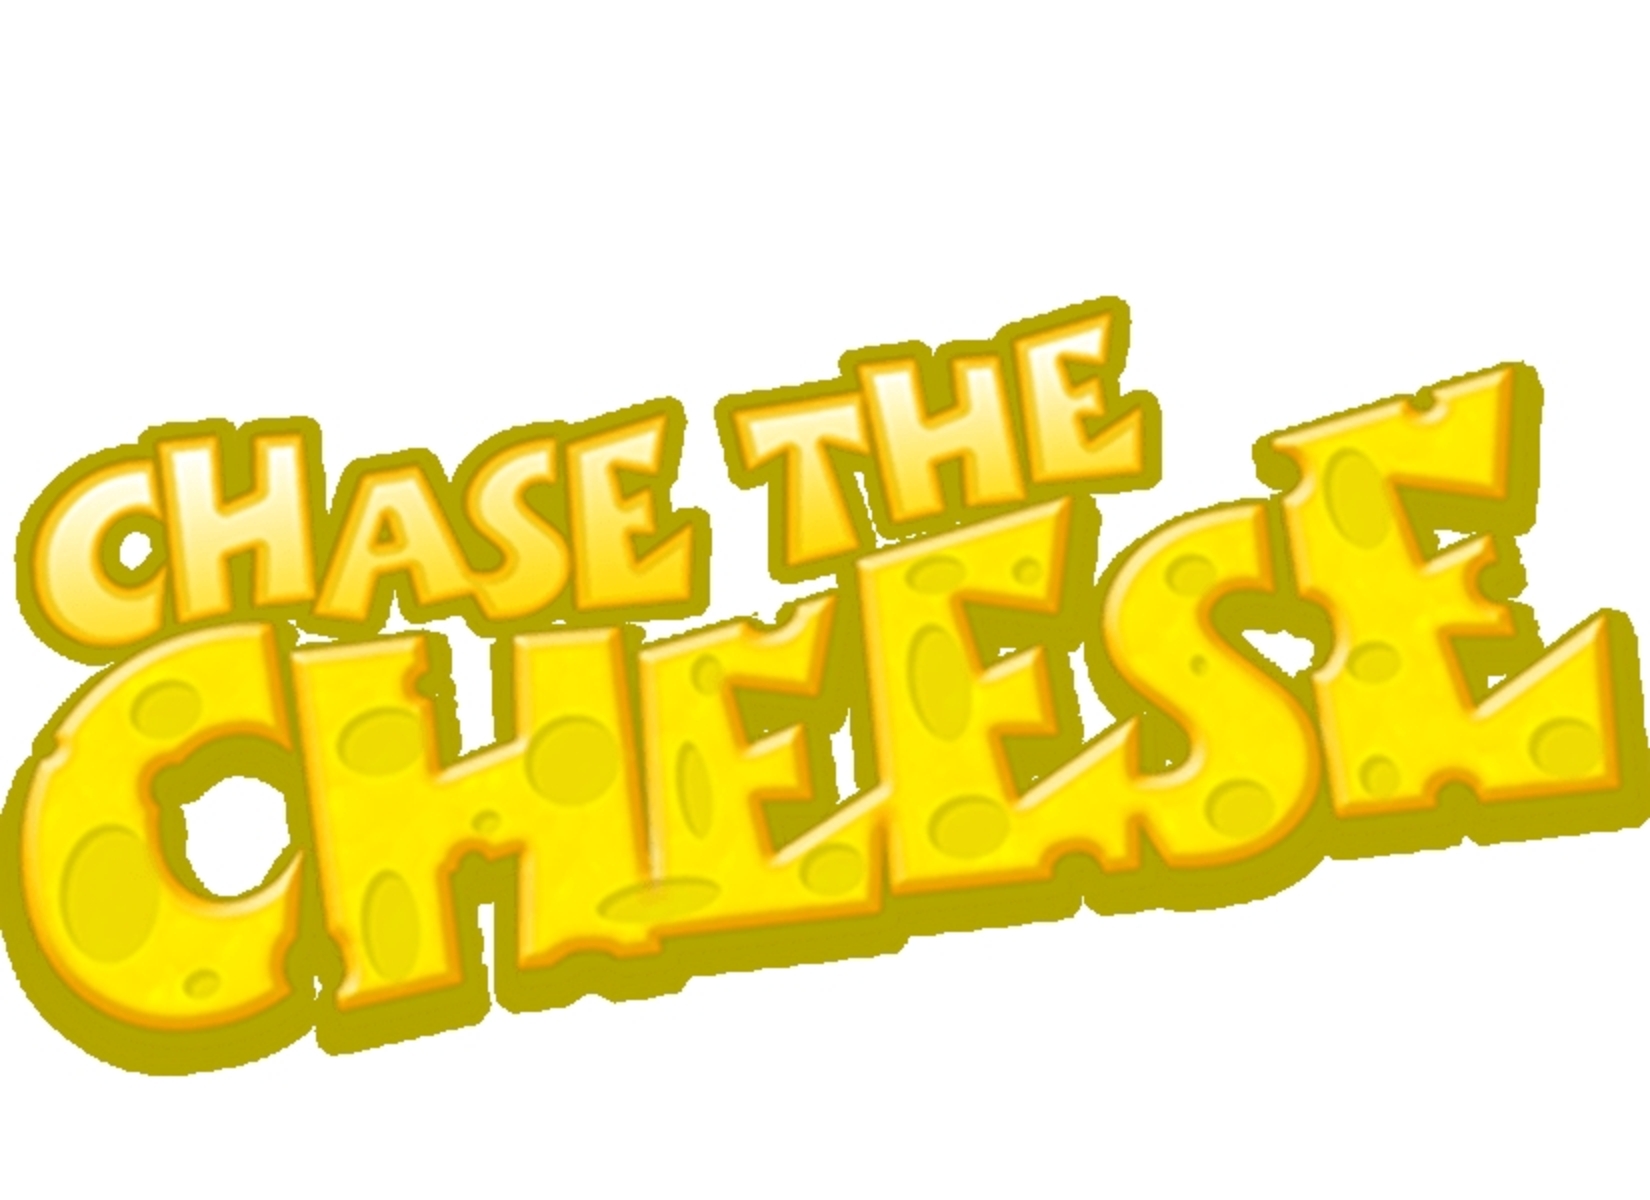 Chase the Cheese demo